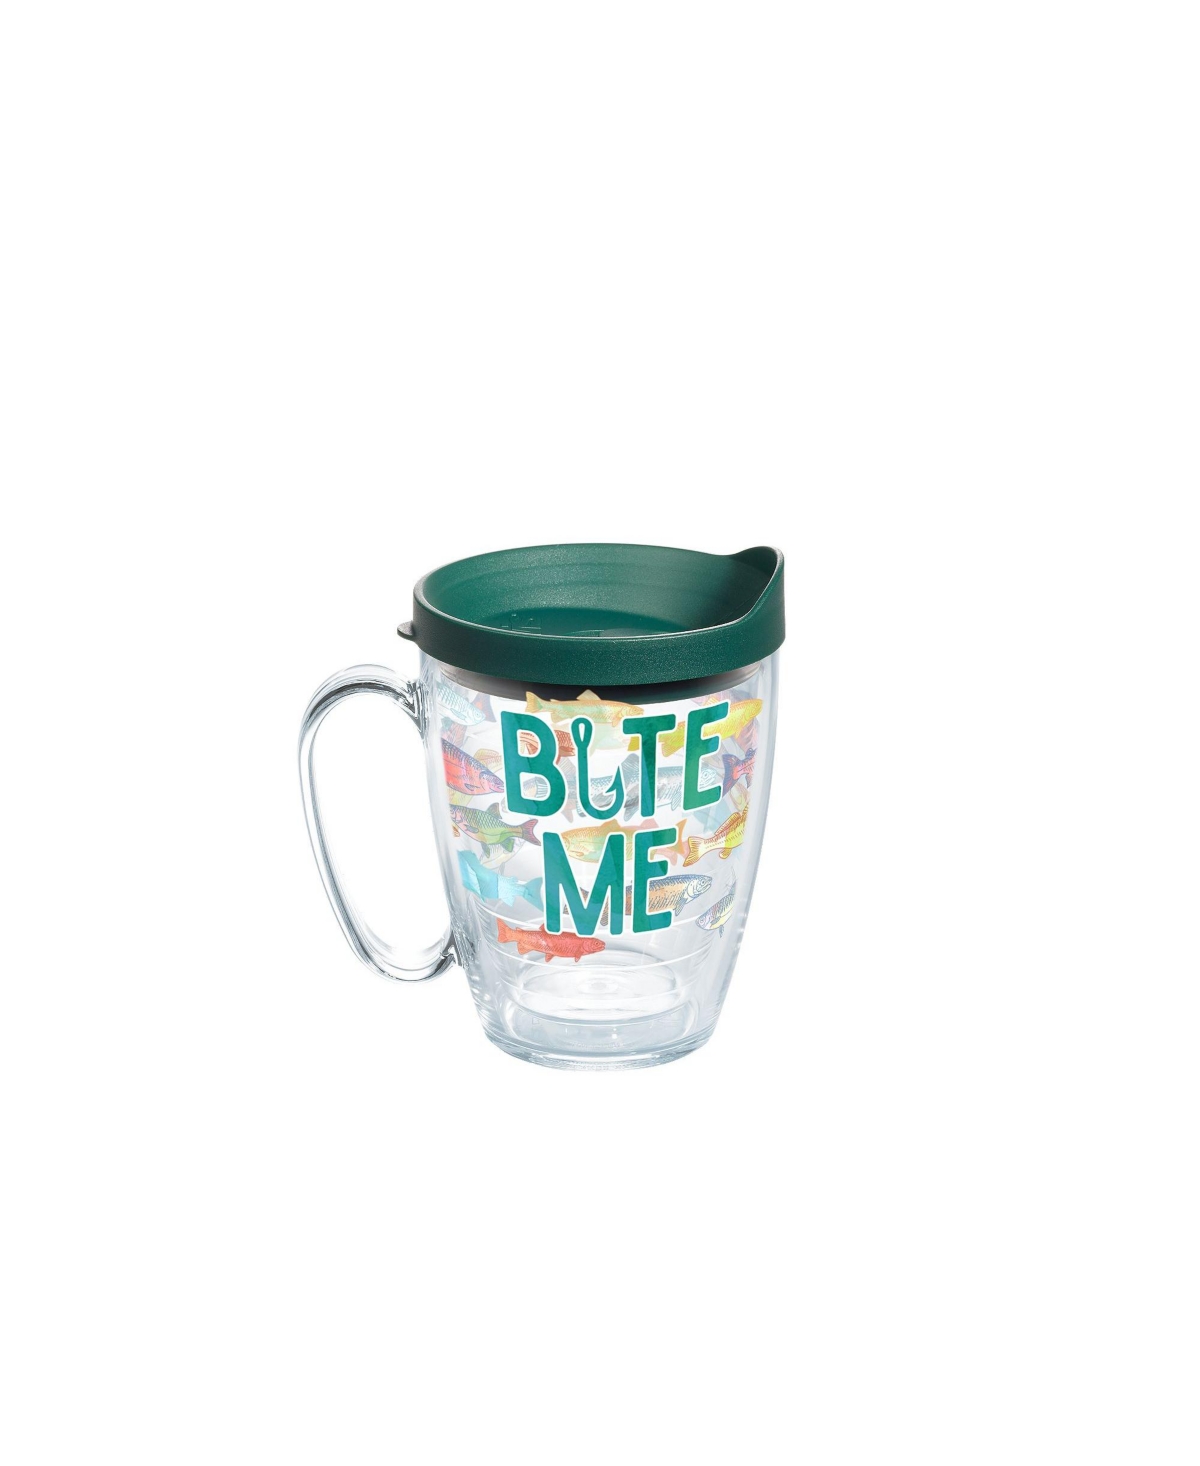 Tervis Tumbler Tervis Bite Me Bait Fishing Made In Usa Double Walled Insulated Tumbler Travel Cup Keeps Drinks Cold In Open Miscellaneous